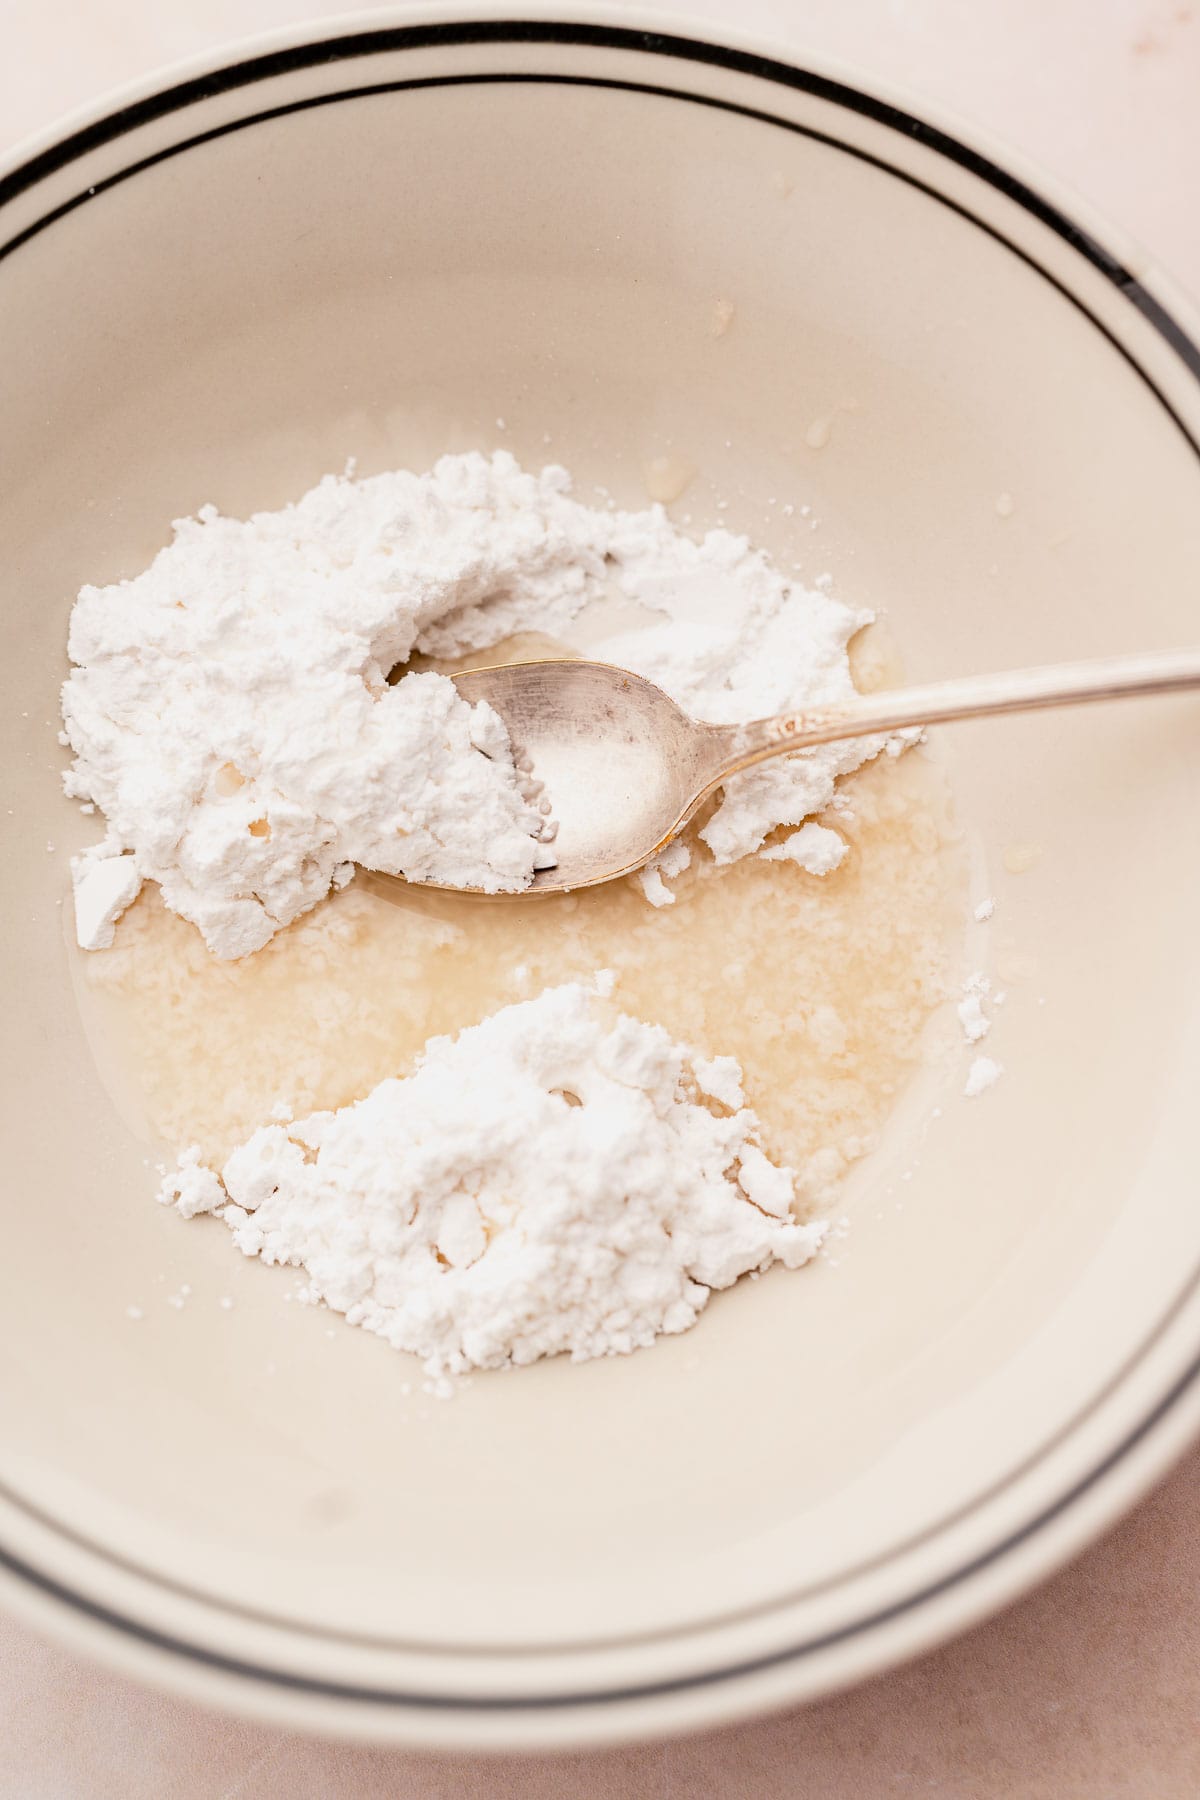 A bowl filled with a white powder, accompanied by a spoon.